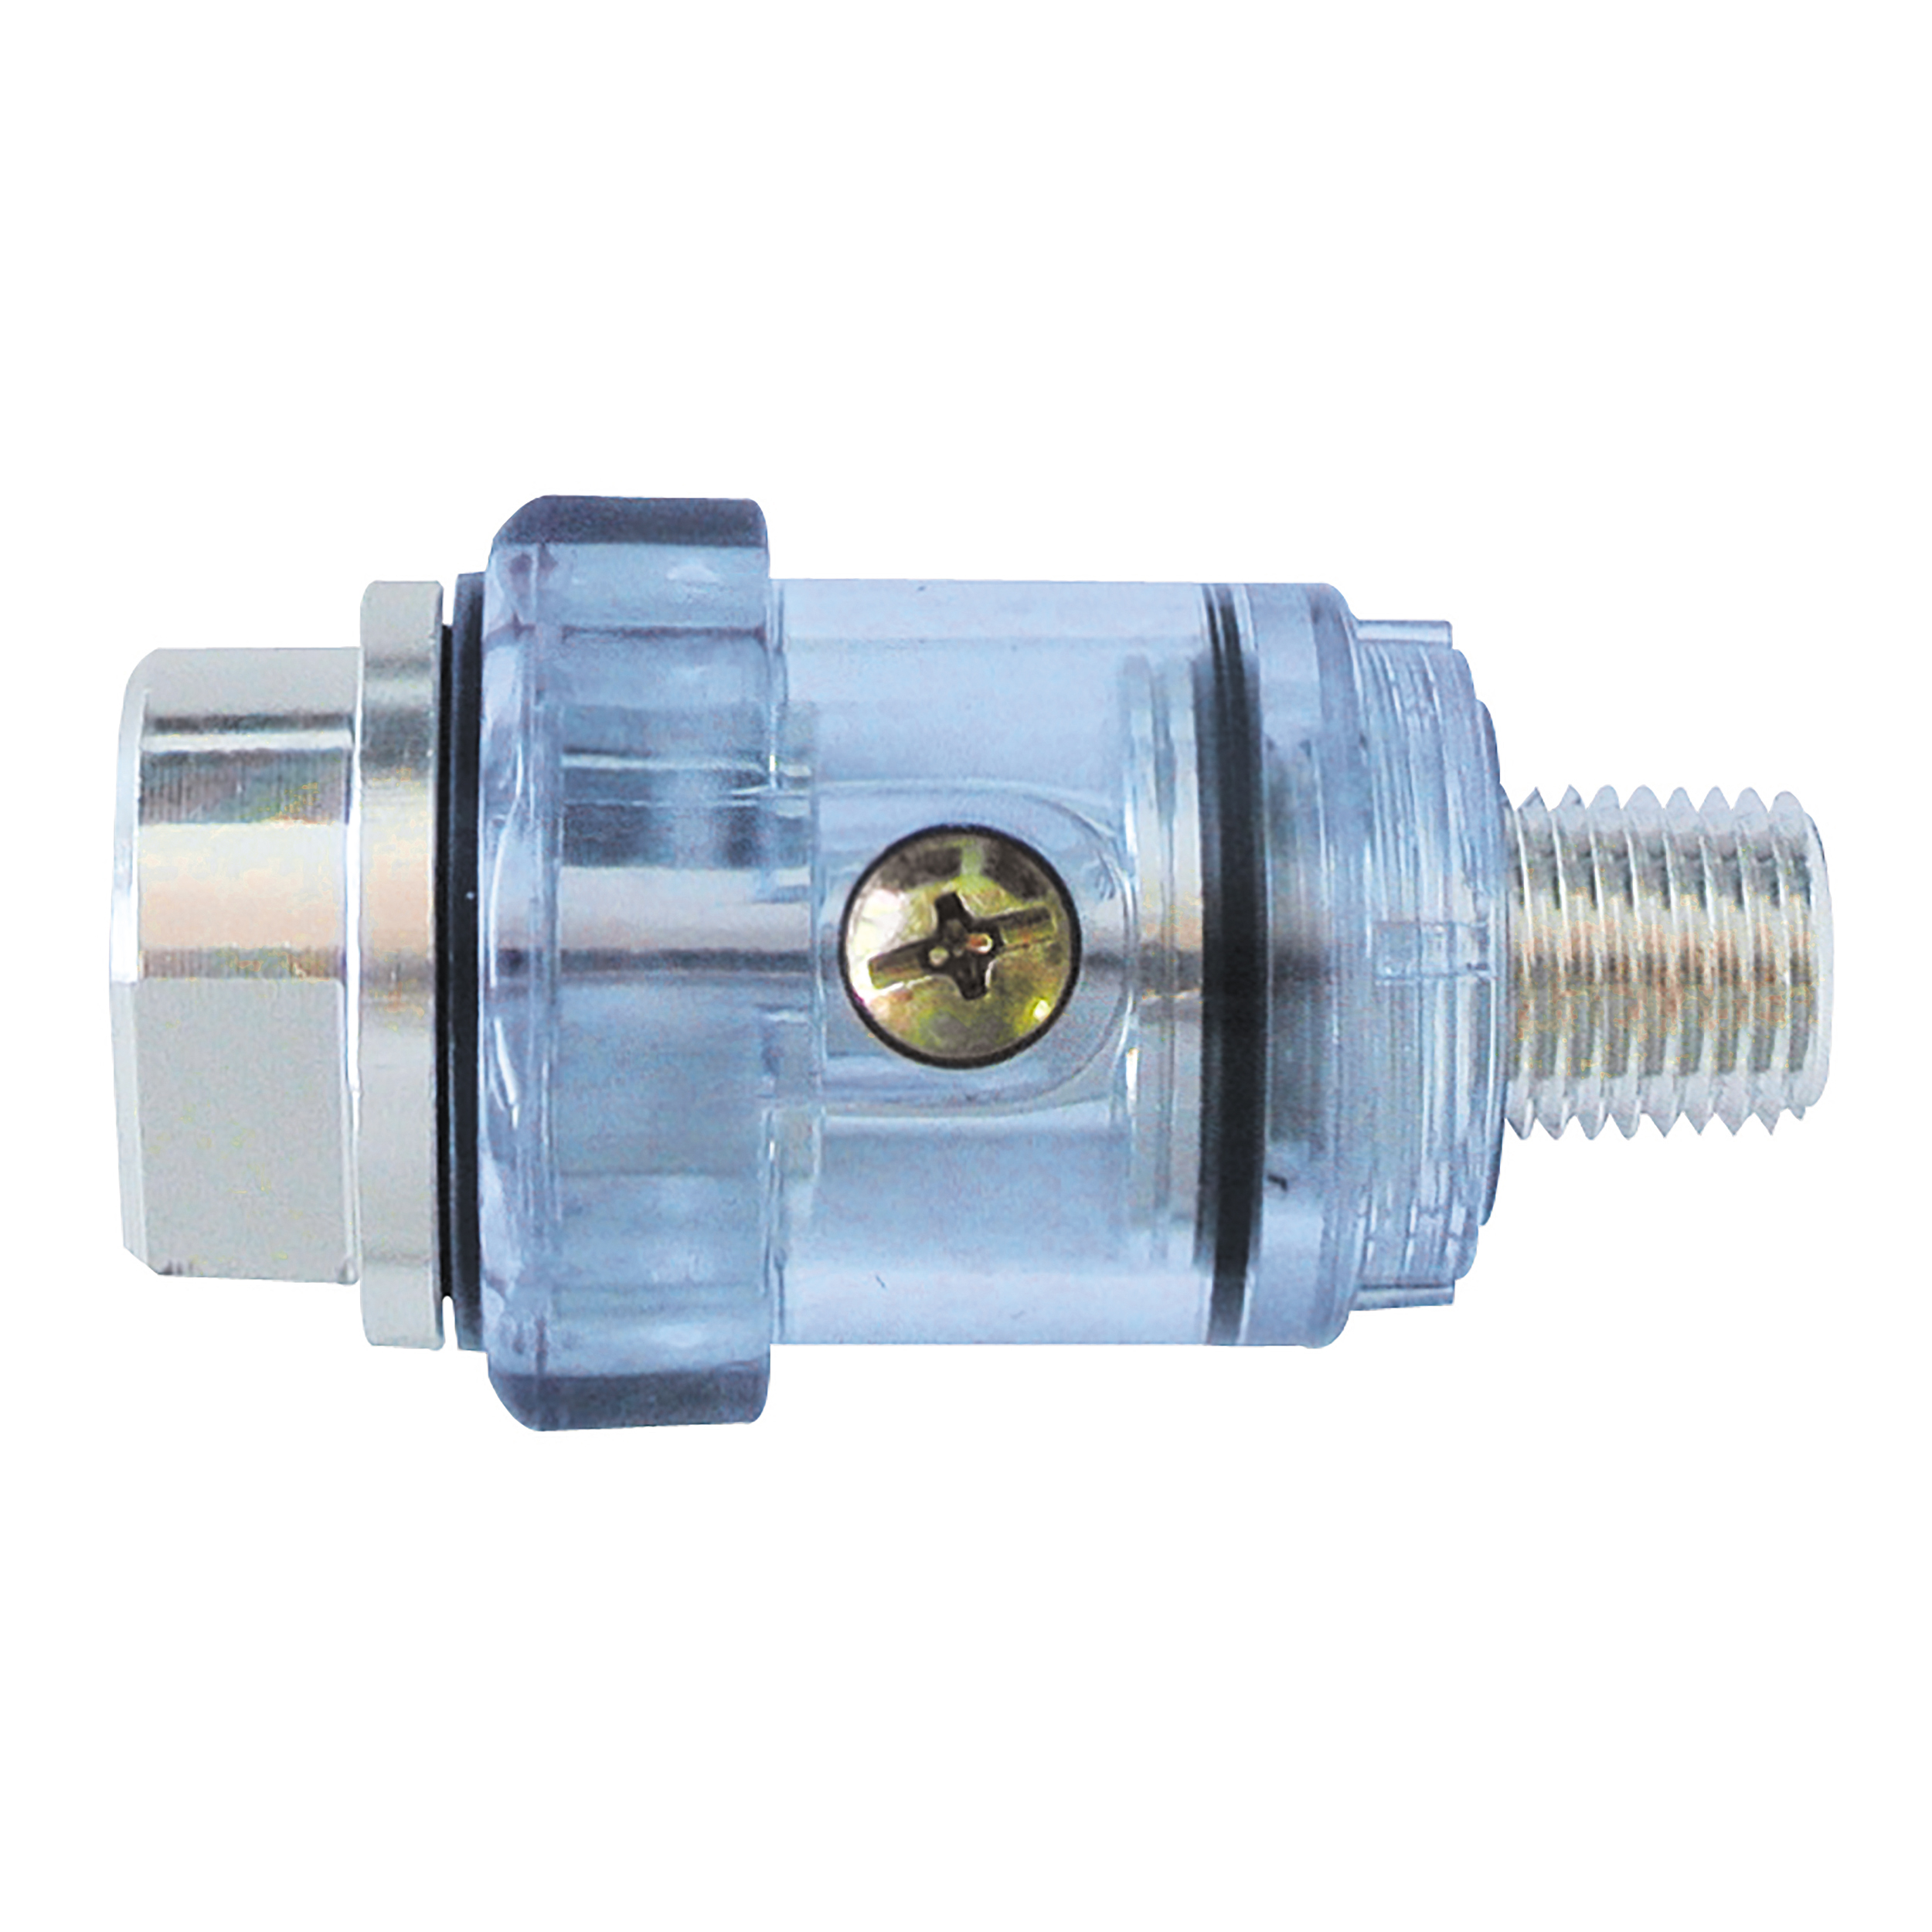 Small lubricator standard, G¼, oil mist due to pulsed air flow, MOP 145 psi